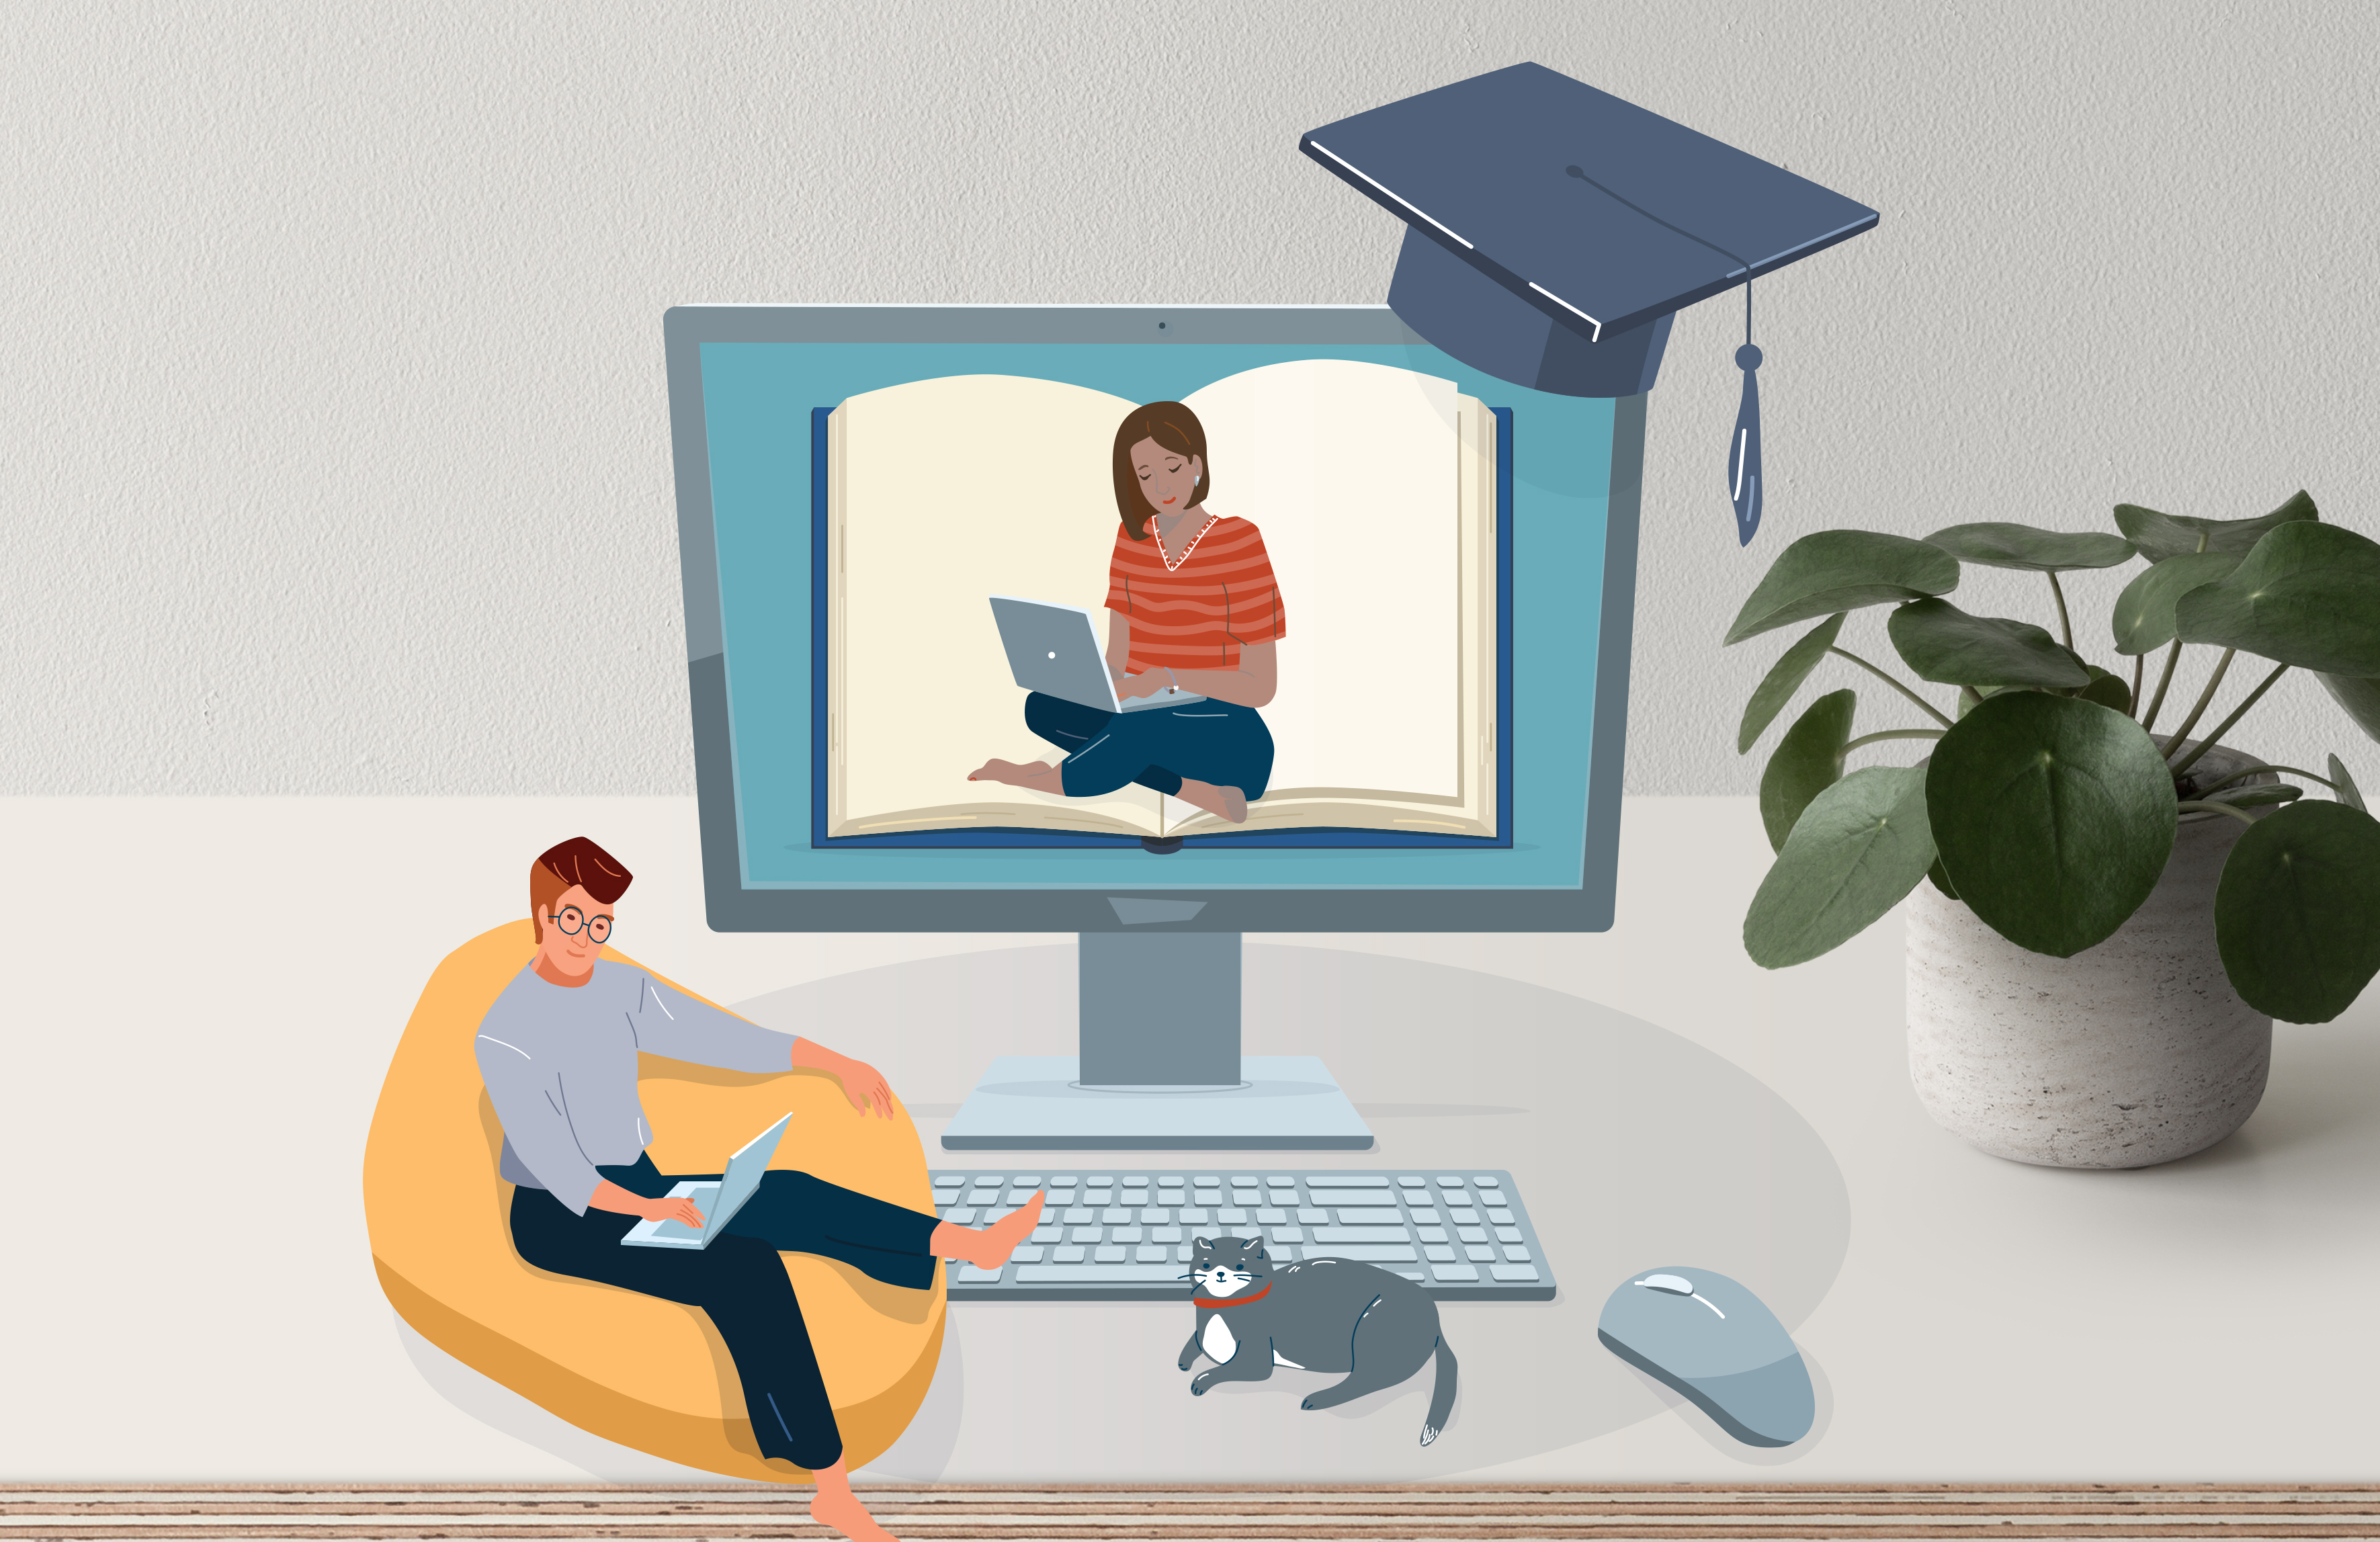 A computer with an image of a woman on a laptop. A man sits in front of the laptop on a beanbag. He is also studying on a laptop. A graduation cap sits on the computer and a cat sits next to the computer.